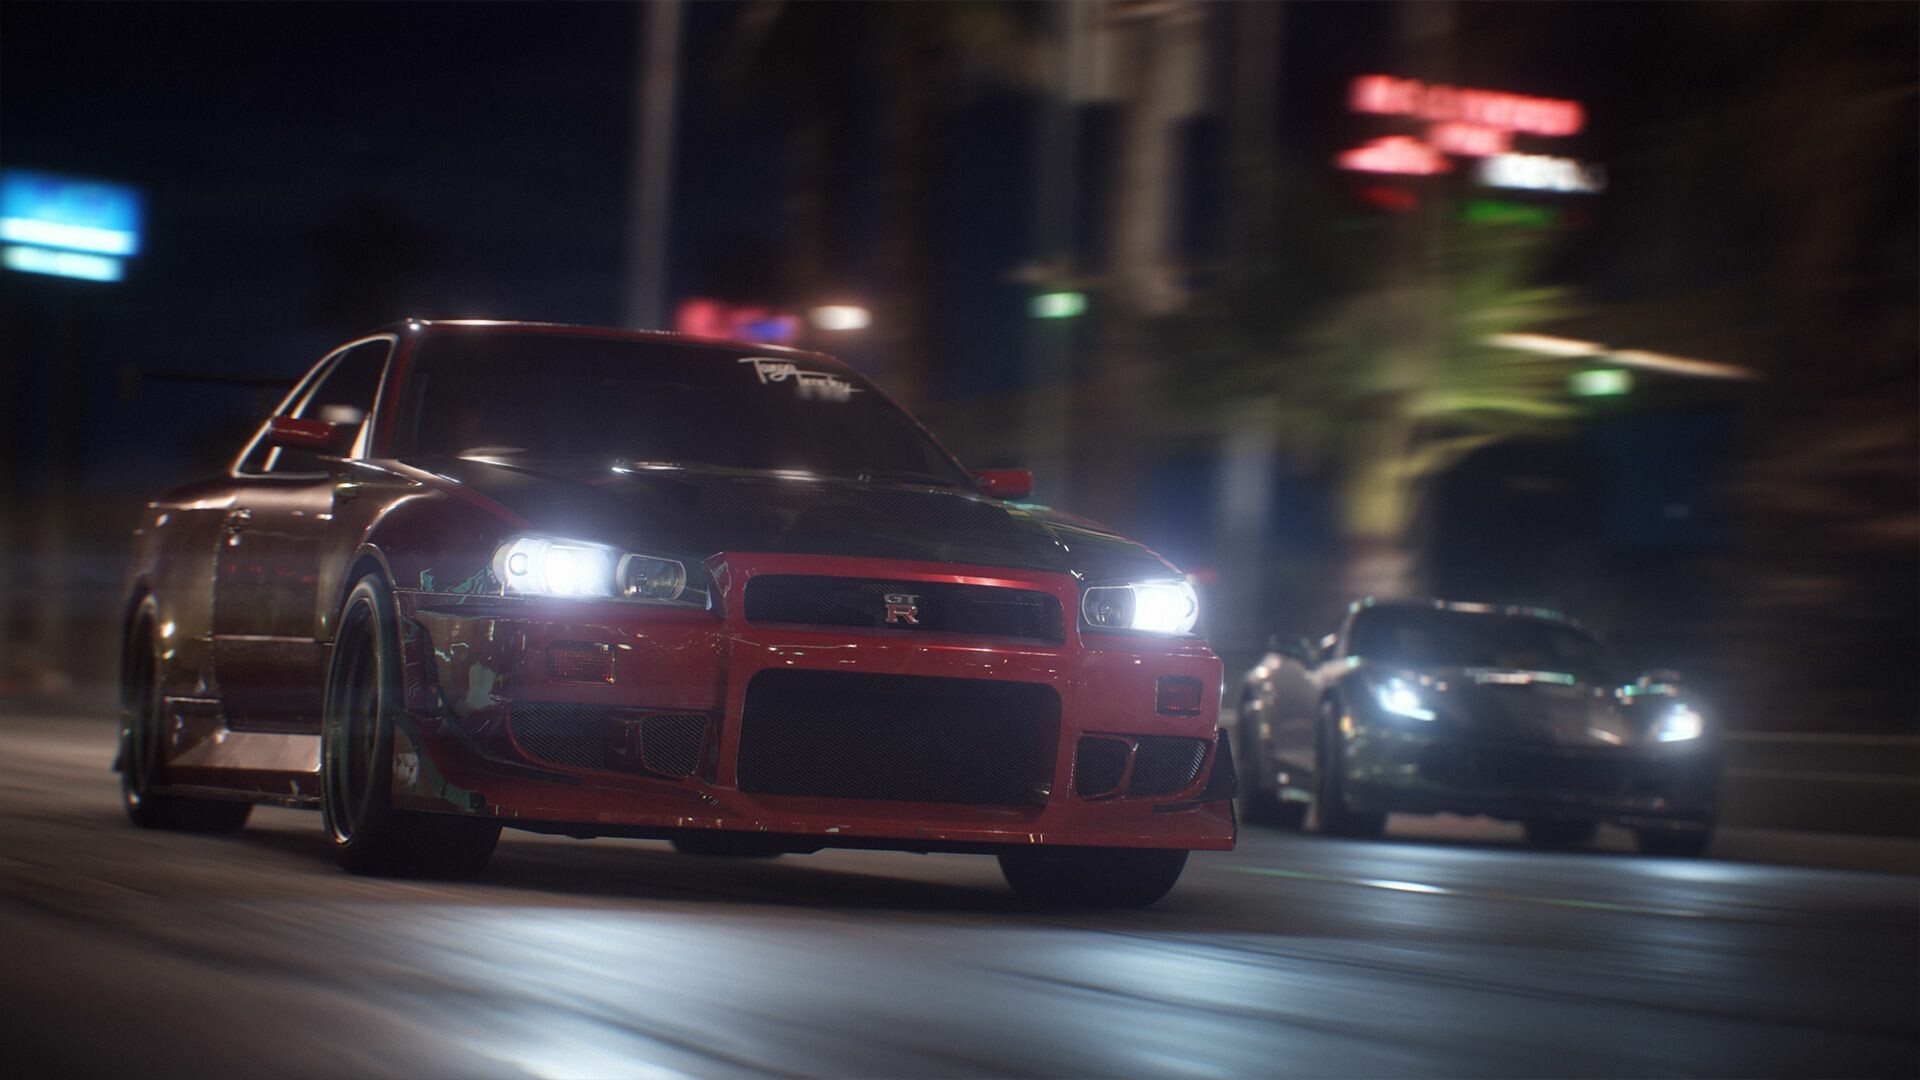 Need for Speed: One of the world's bestselling video game franchises, NFS Payback. 1920x1080 Full HD Wallpaper.